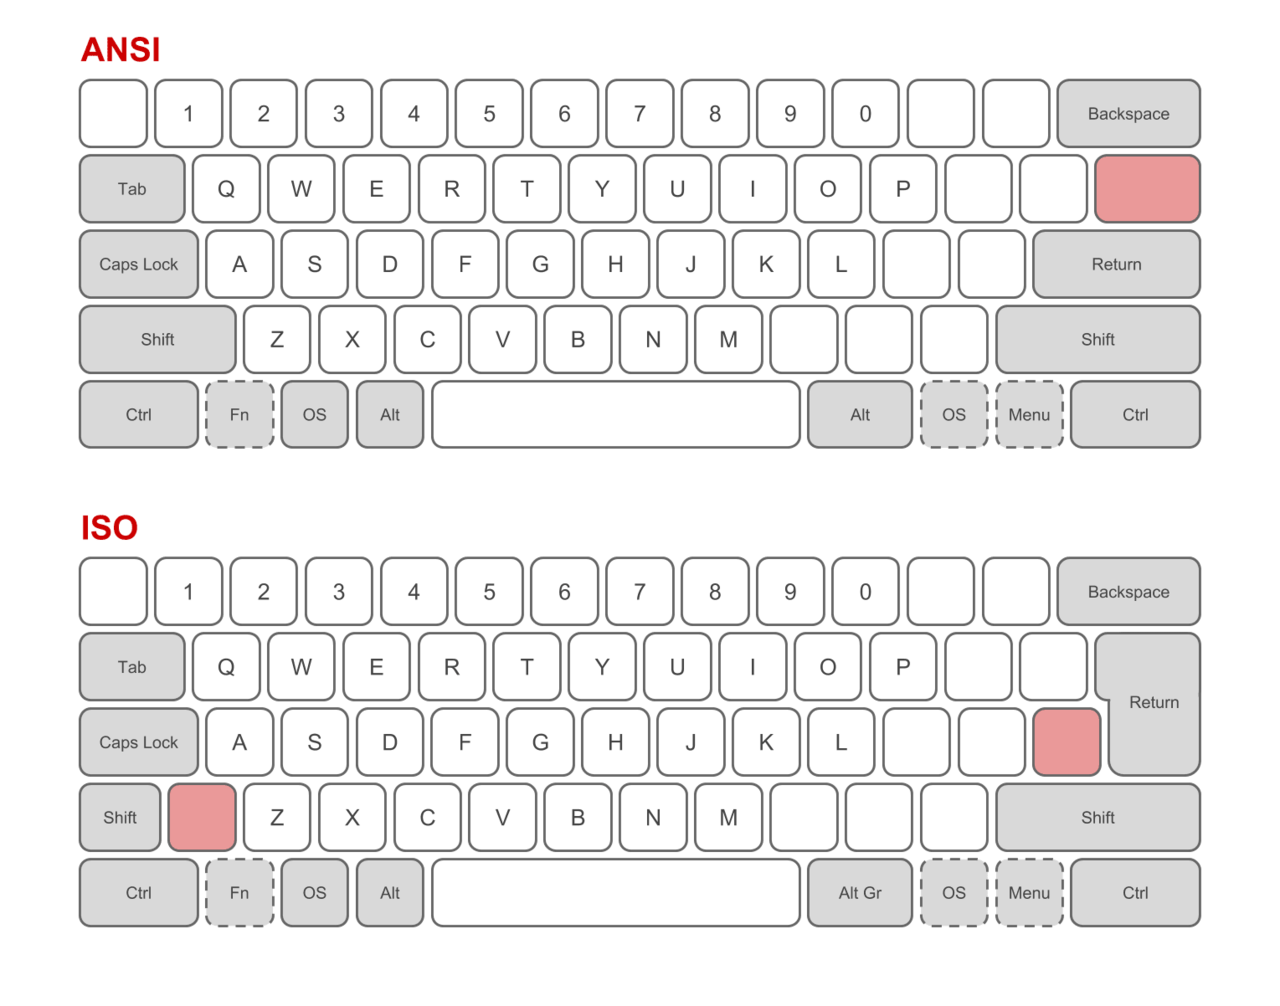 inituition behind qwerty keyboard layout